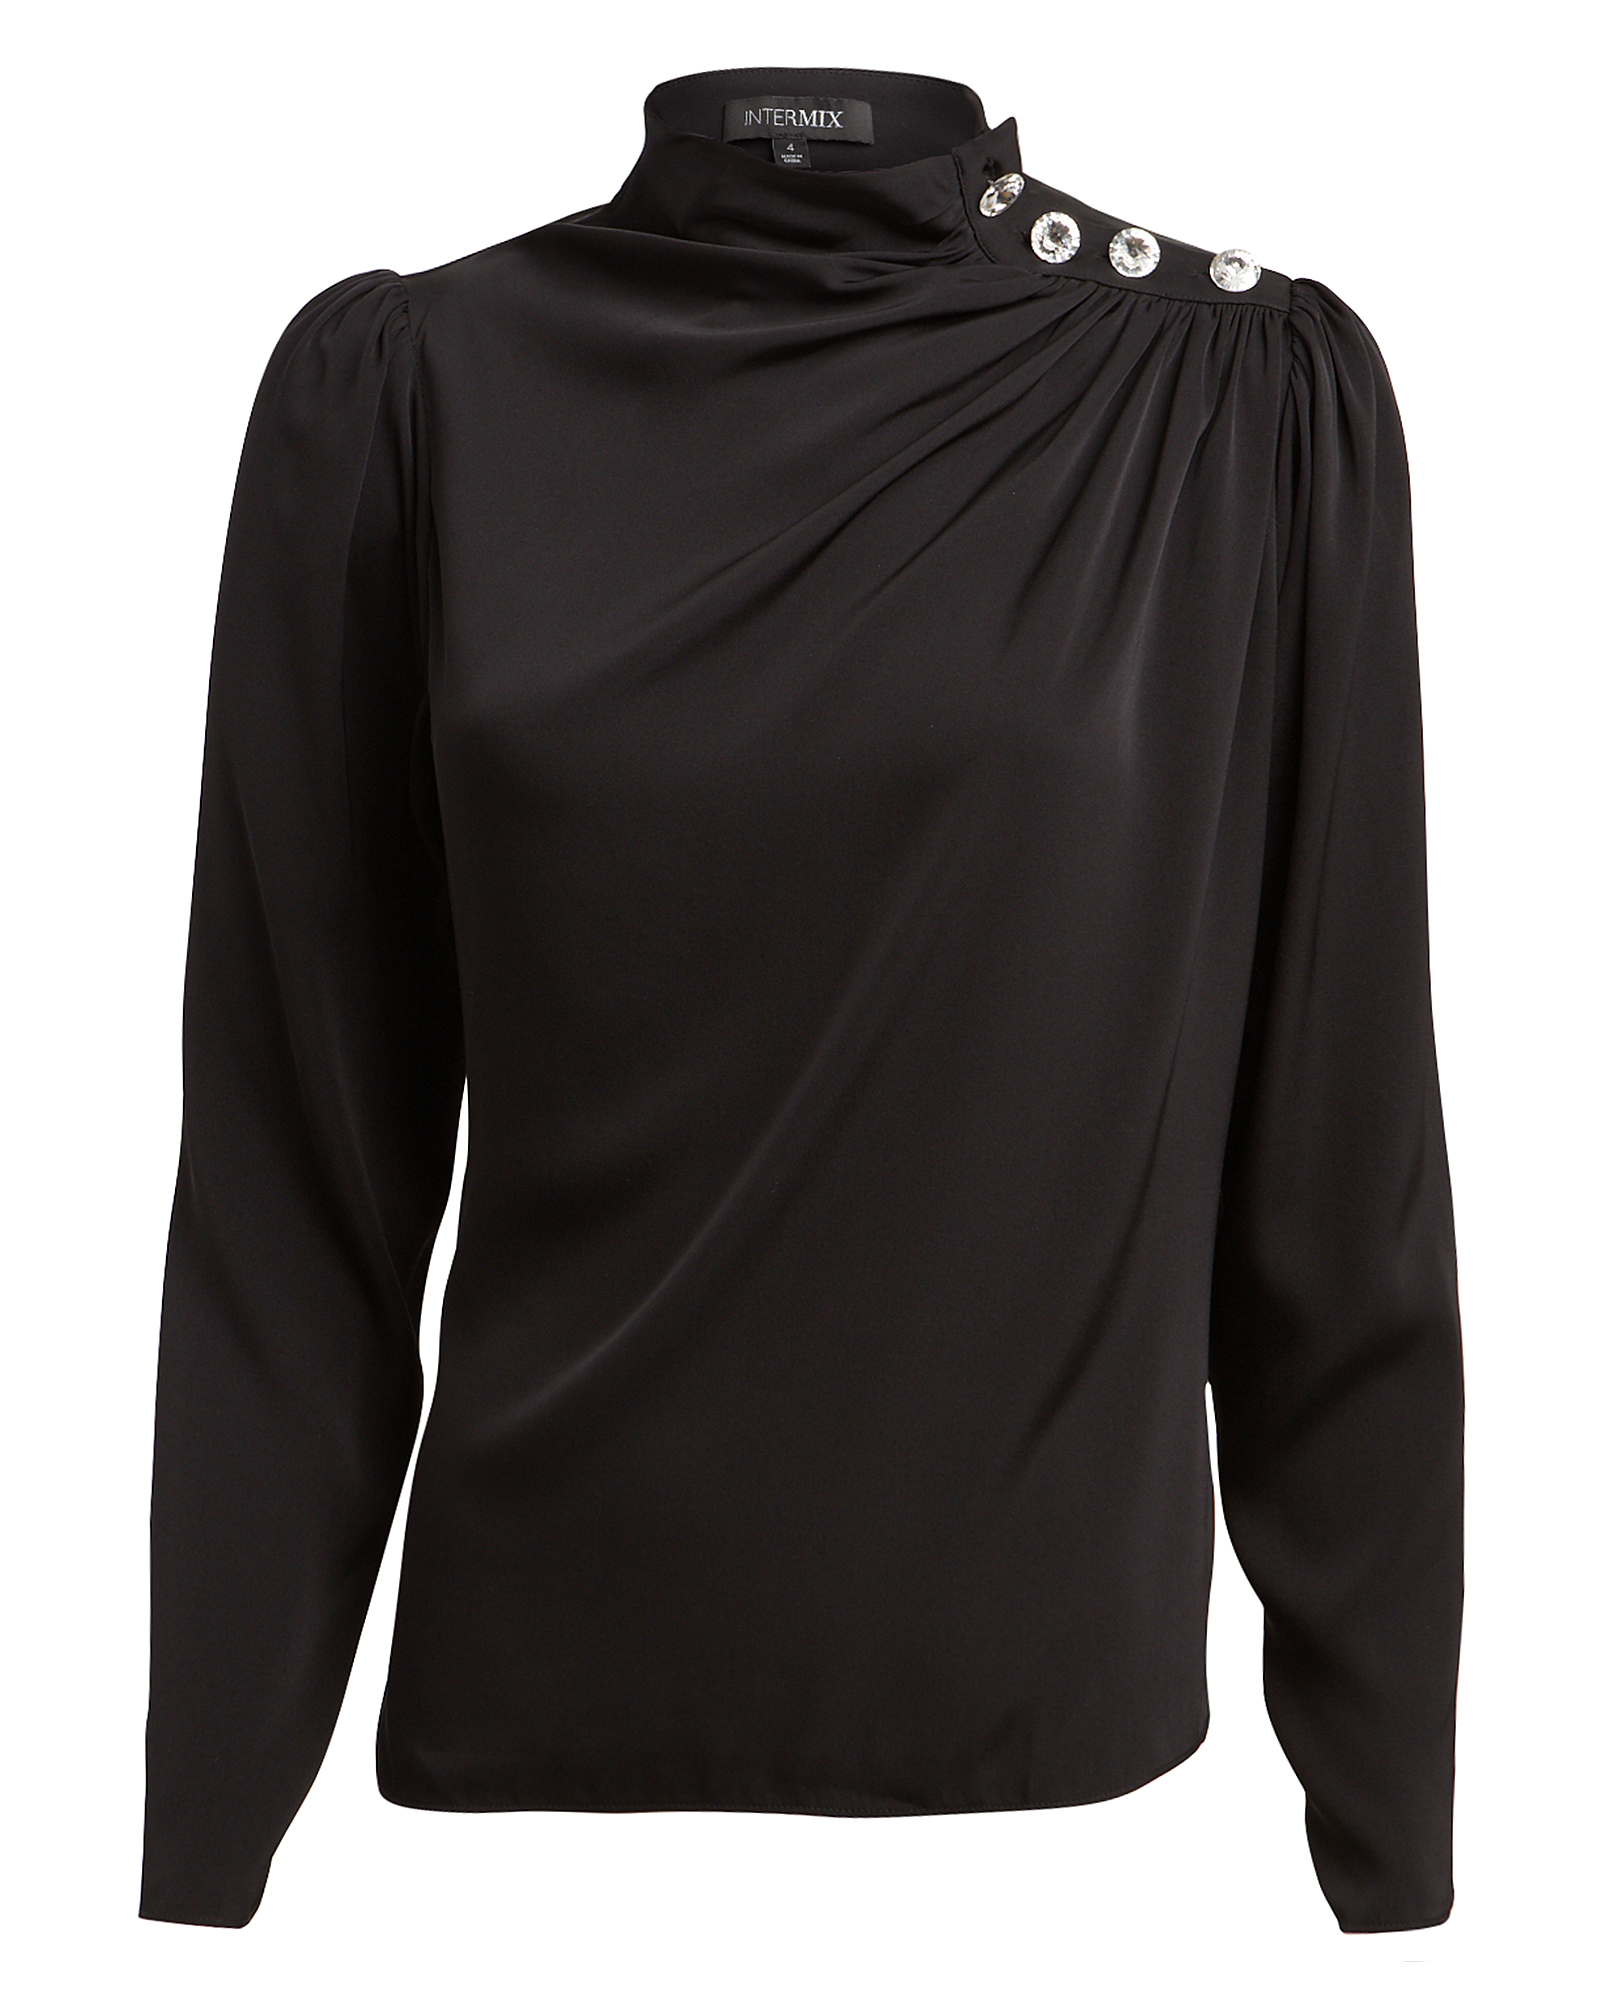 Intermix Charity Embellished Silk Blouse In Black | ModeSens